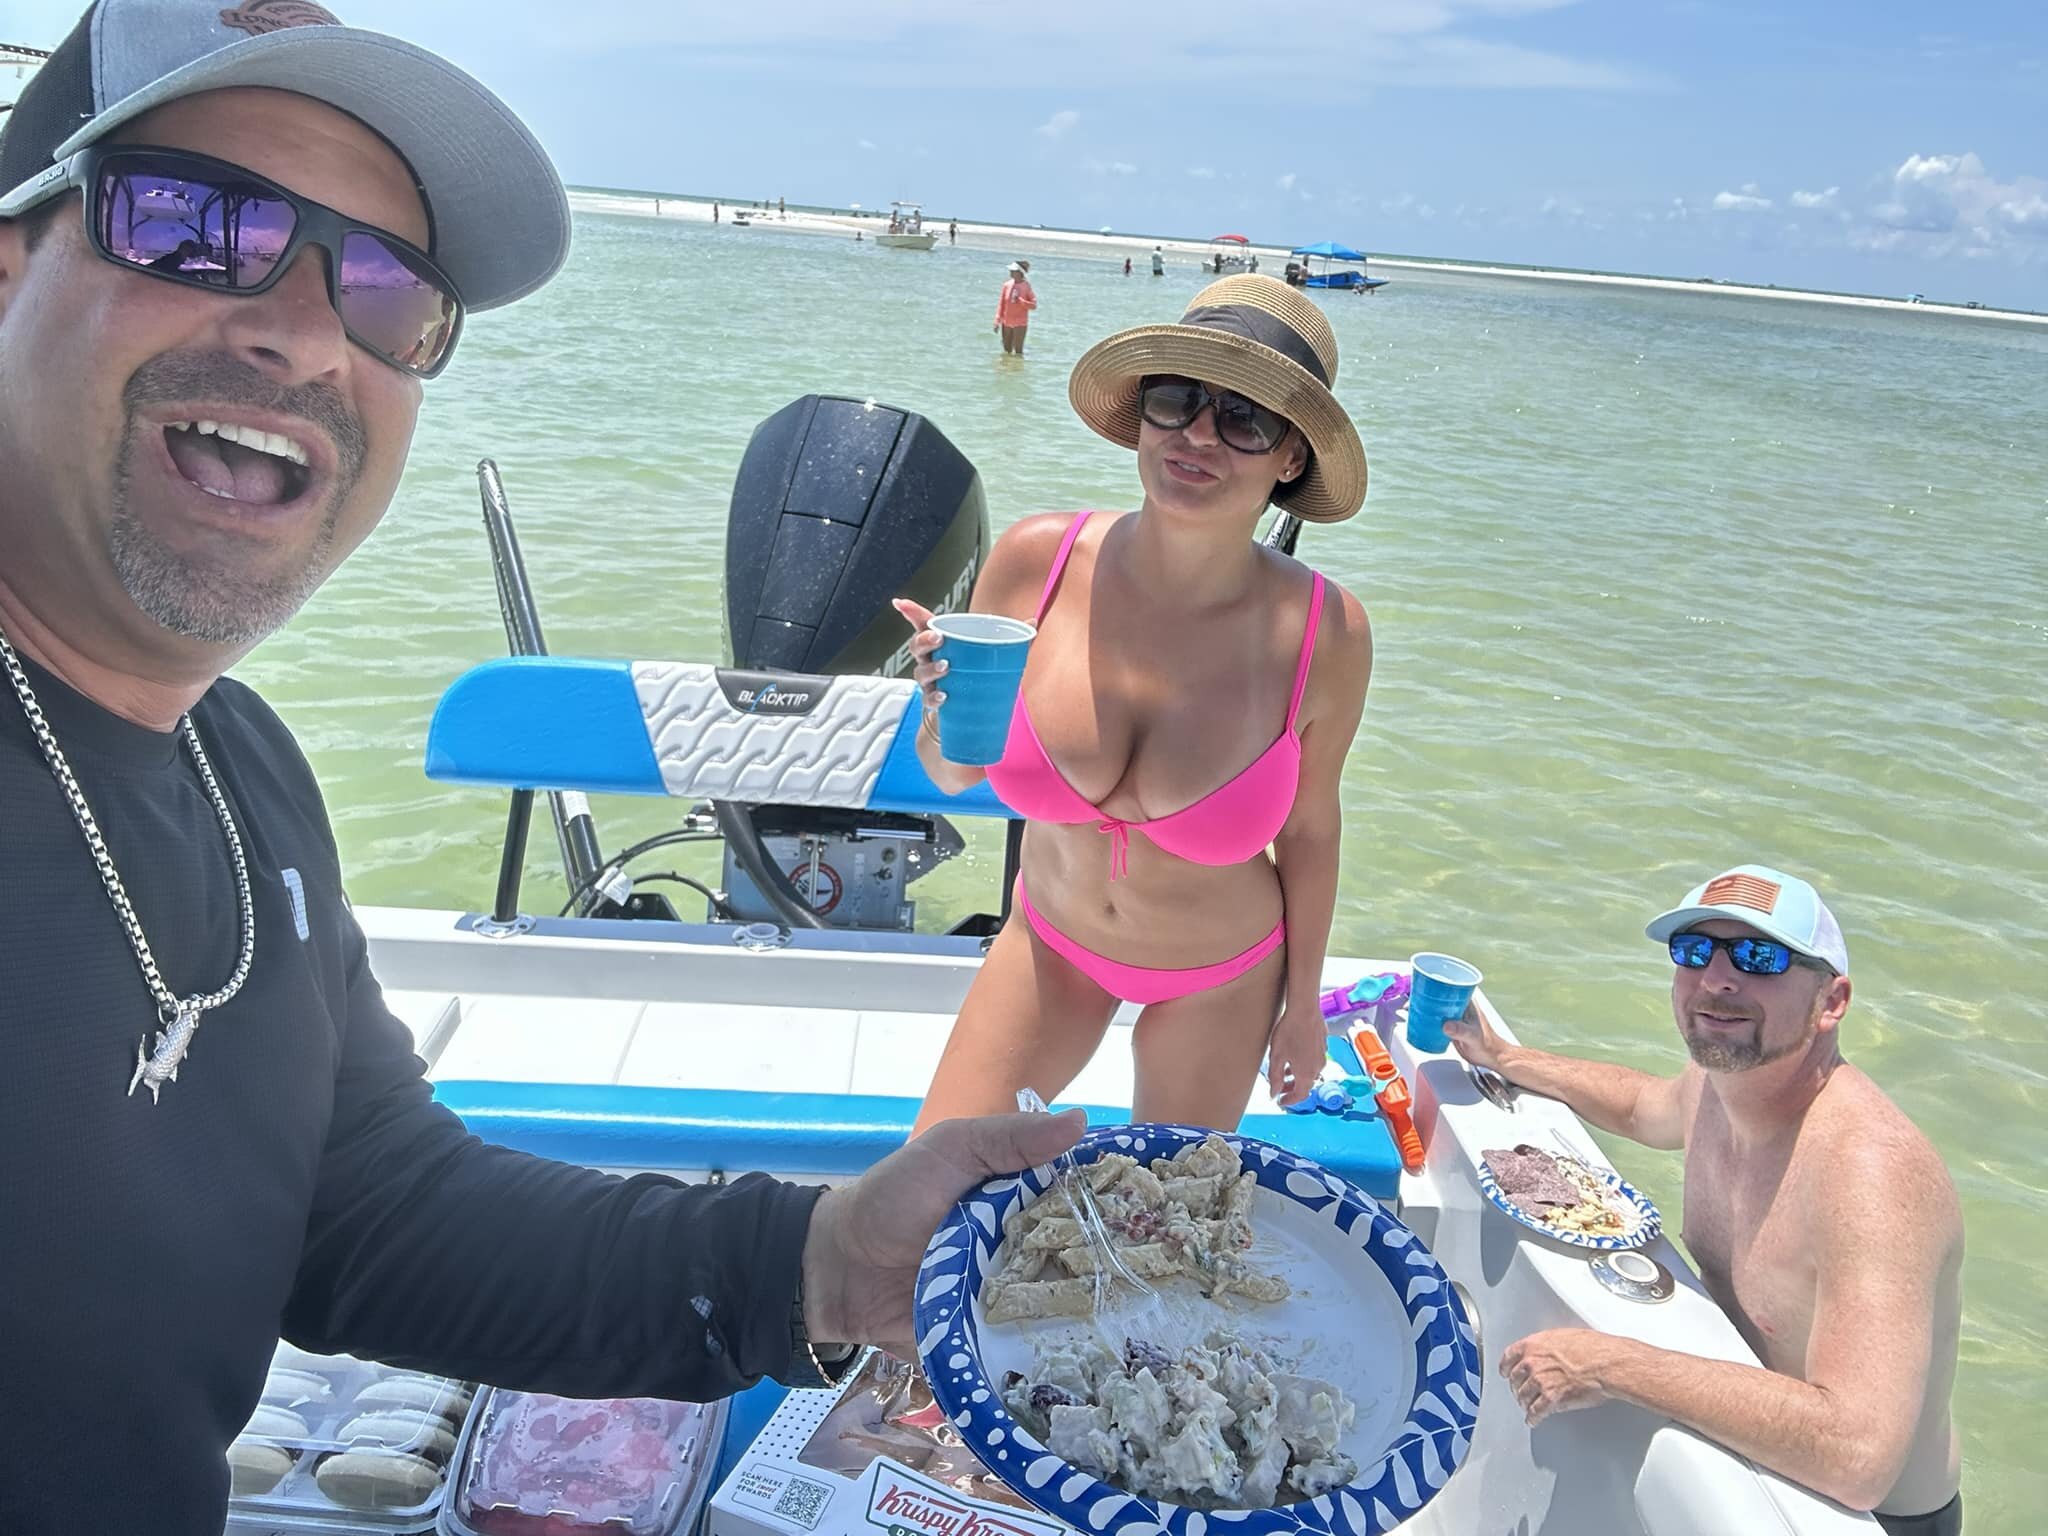 This is how we sand bar it what a great menu of delicious food prepared for our outing today!!!!! Absolutely amazing thank you Terri Rose!!!!!

Blacktip Boats